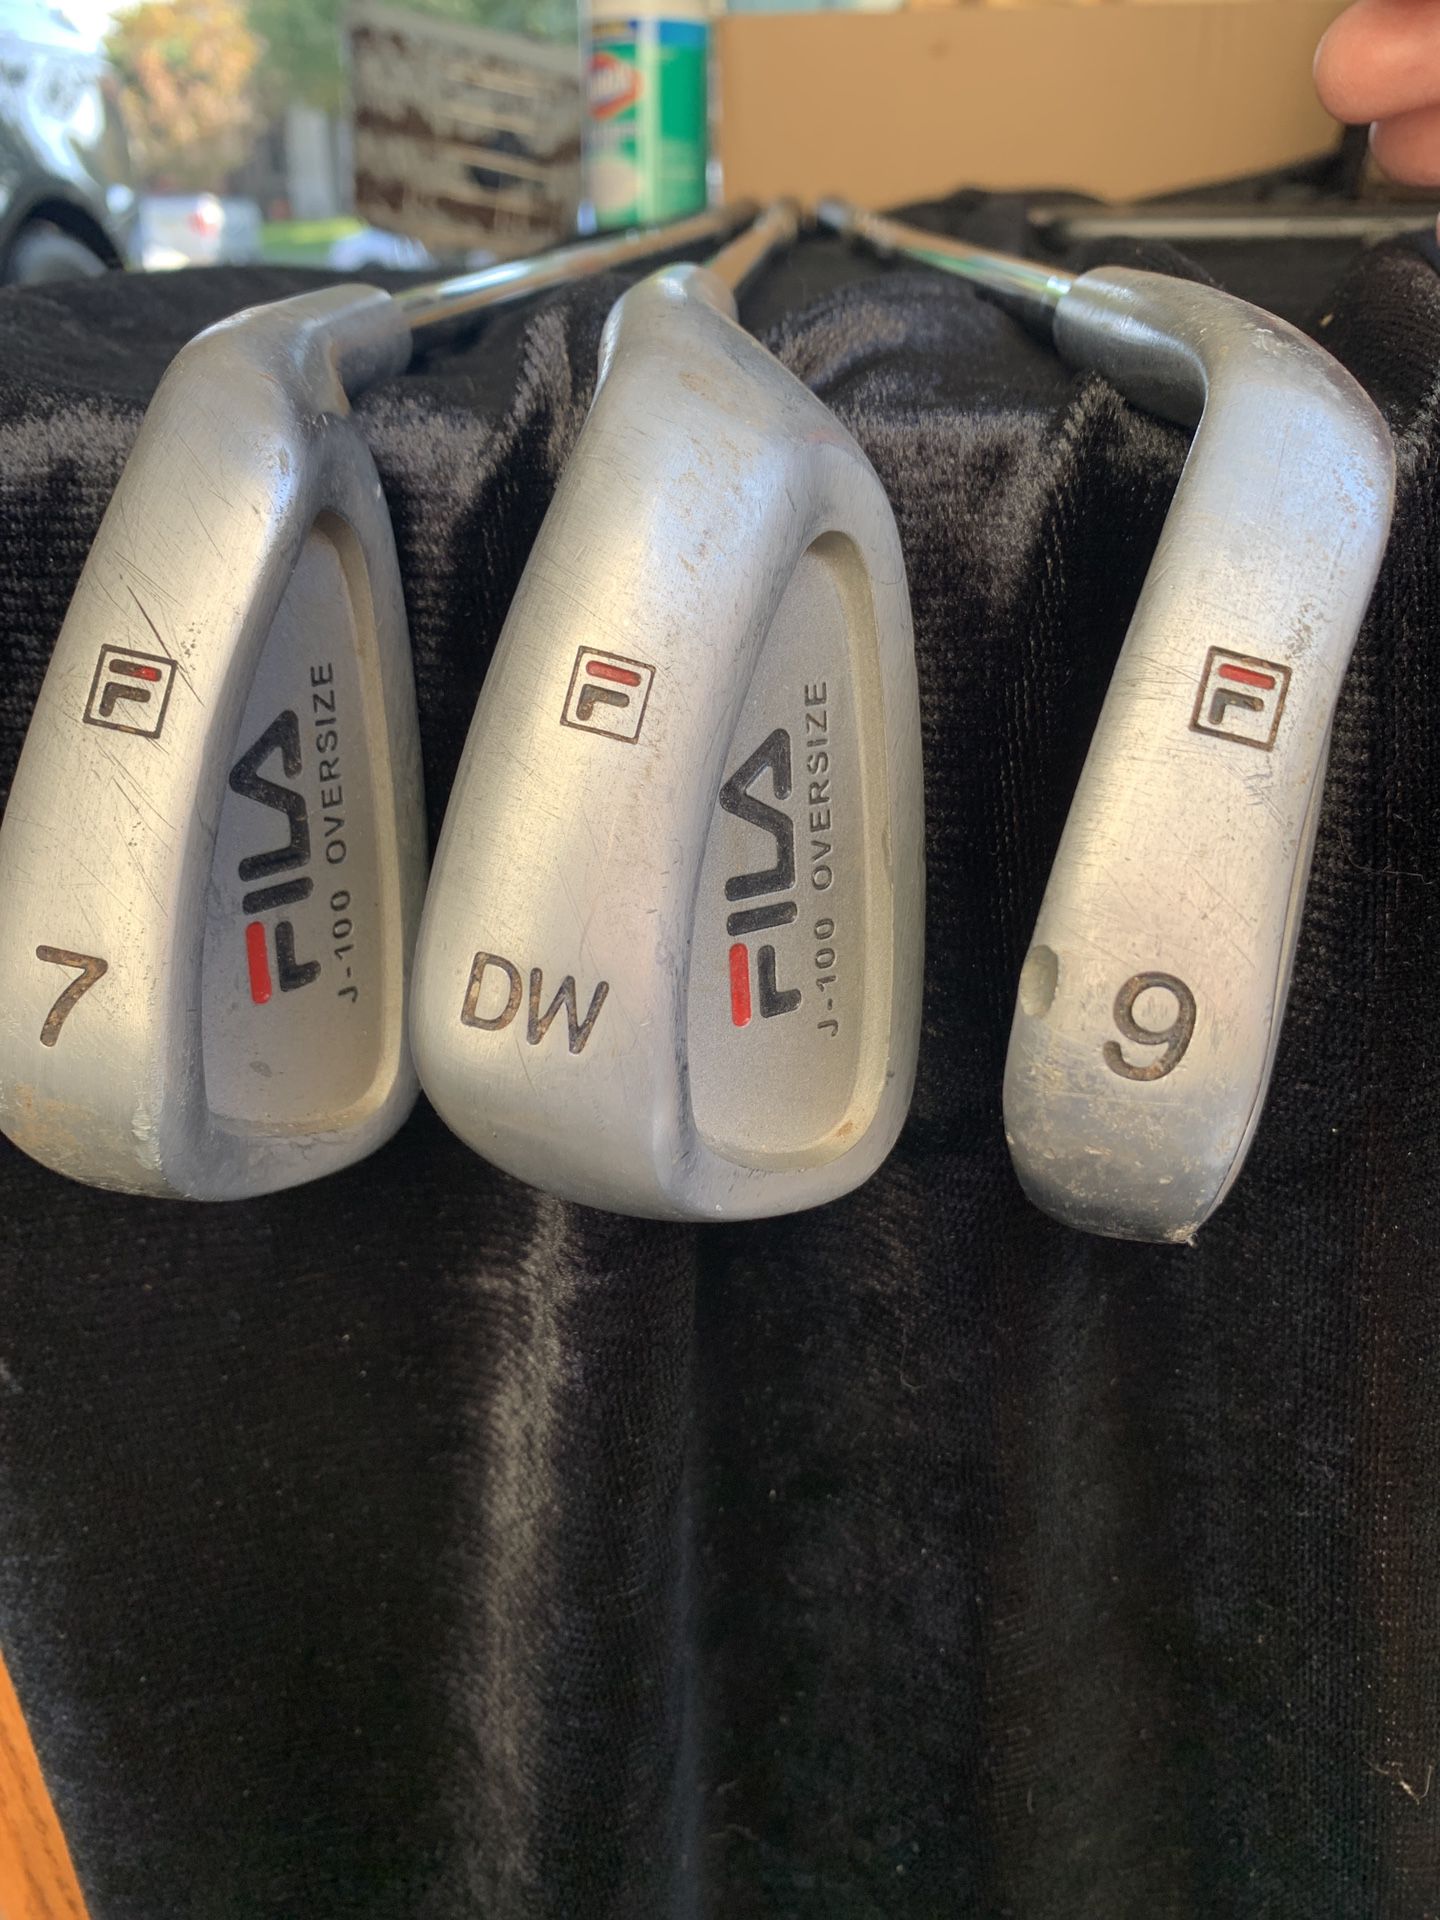 Fila J 100 Oversize Junior Golf Clubs 7 and 9 And Clubs Total Of 3 for Sale Turlock, CA - OfferUp